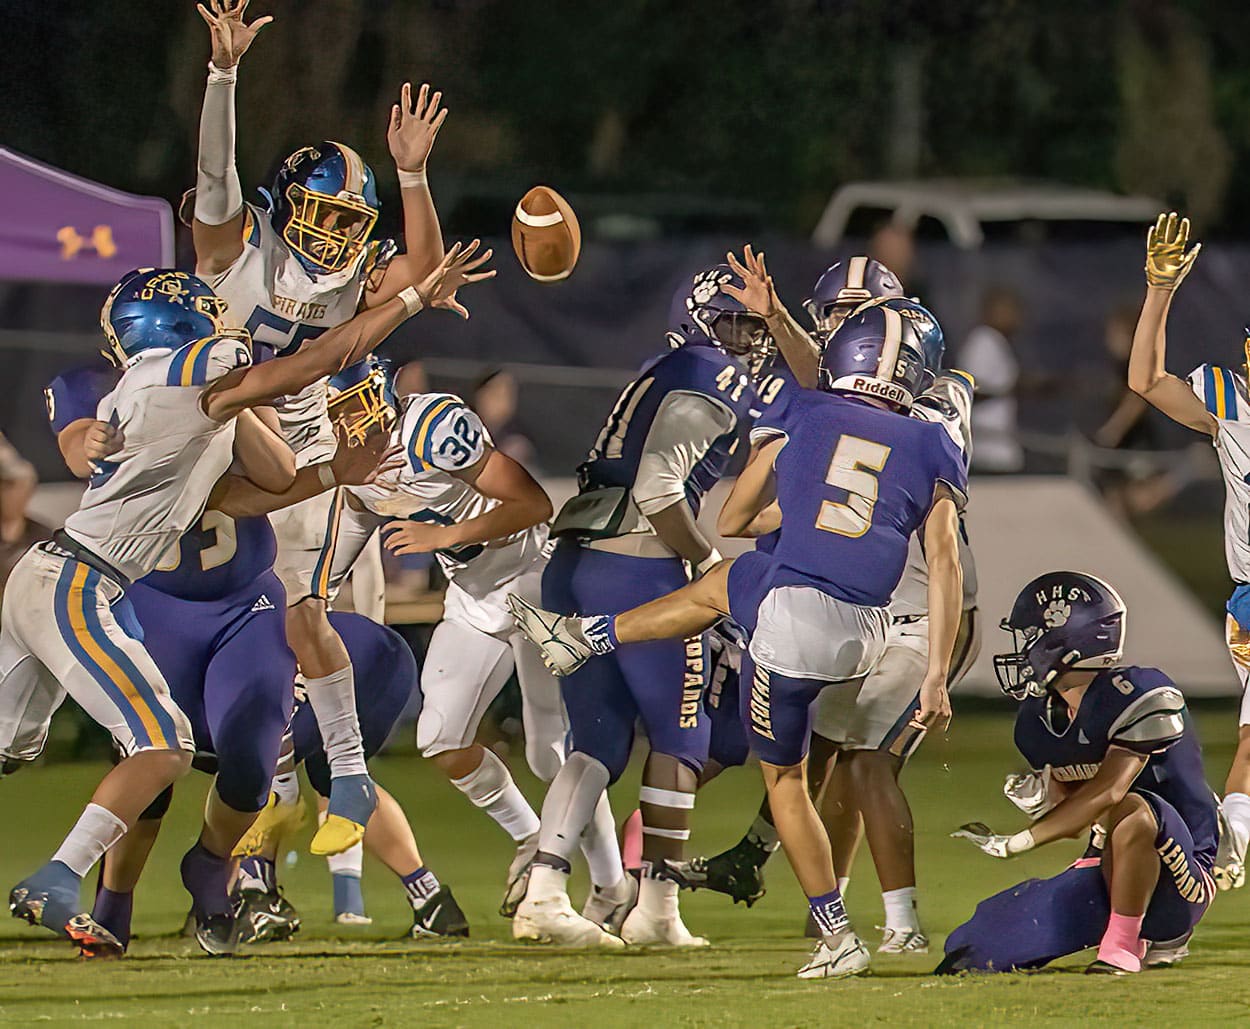 Hernando placekicker, 5, Jesse Faulks kicks an extra point despite the blocking attempt by Crystal River during the Homecoming game in Brooksville. The hold was by ,6, Emanuel Acker. Photo by JOE DiCRISTOFALO